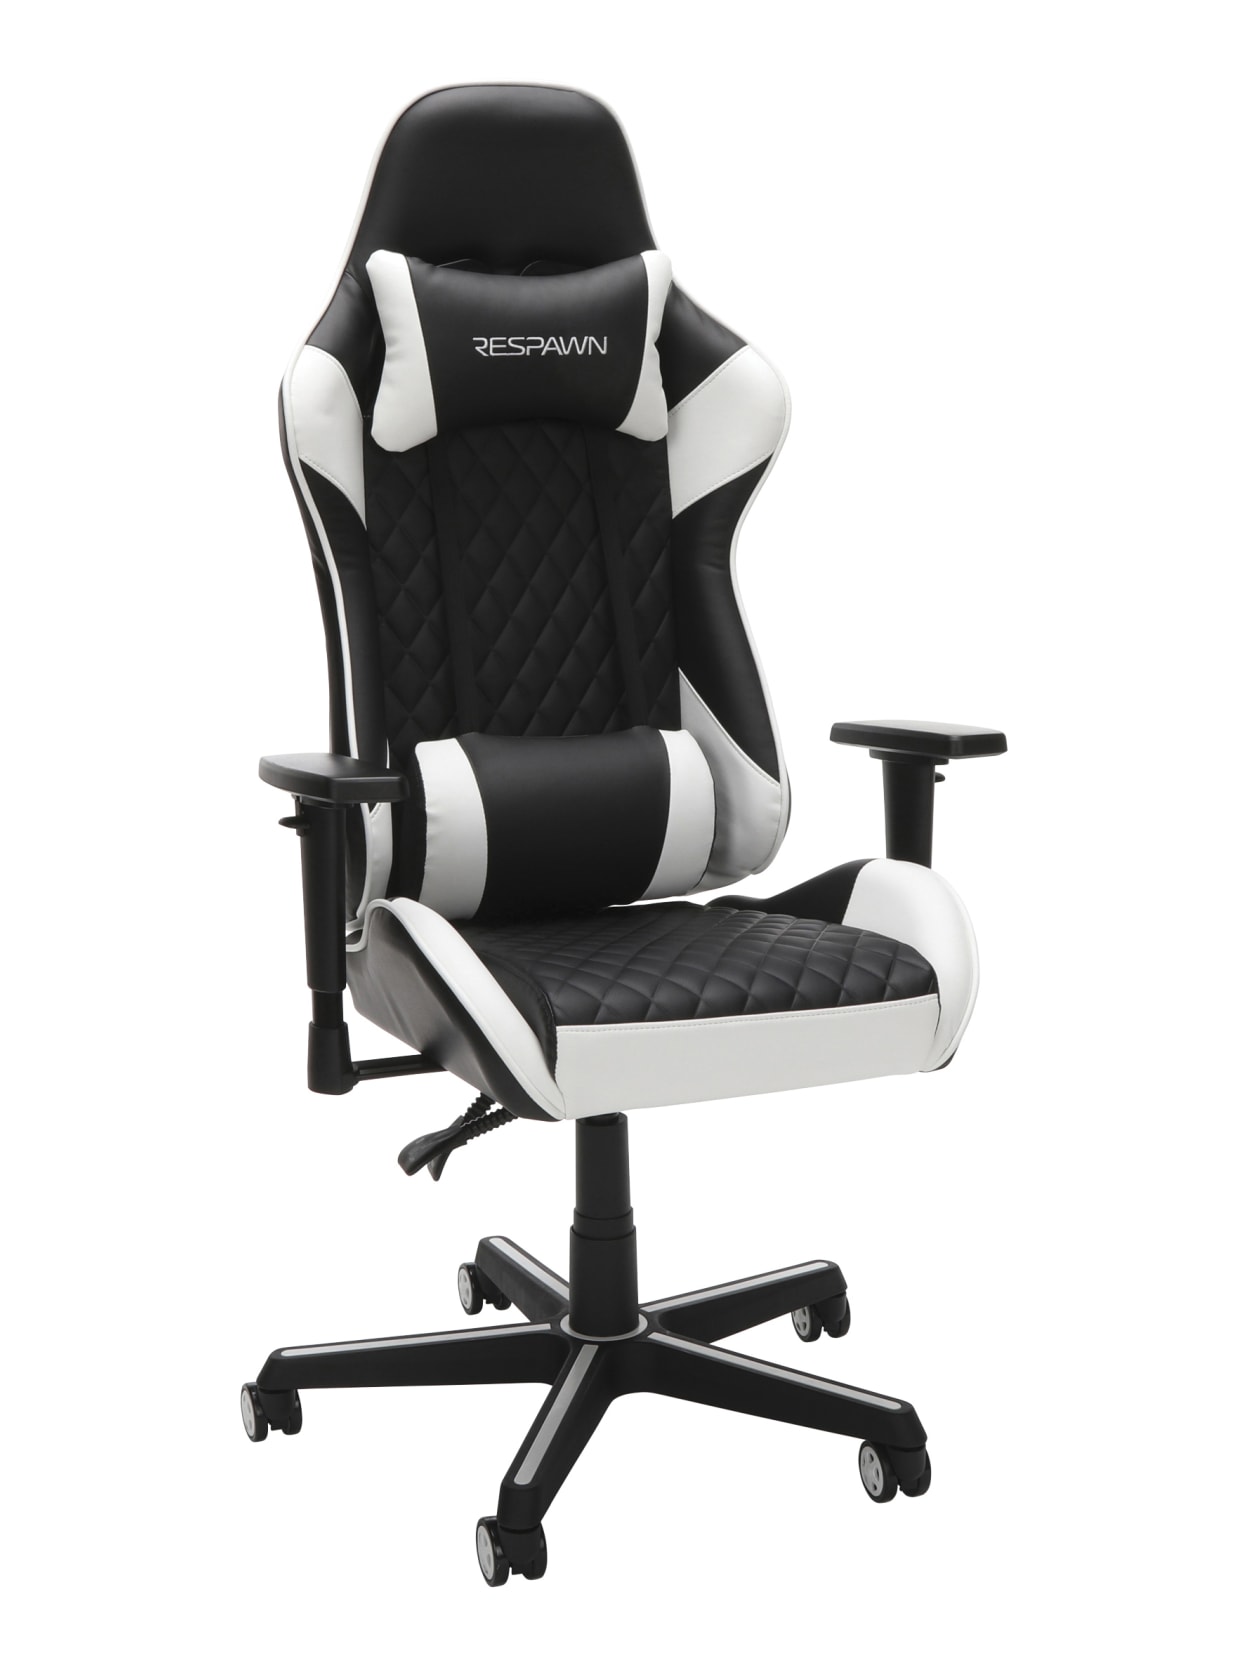 Respawn 100 Racing Style Bonded Leather Gaming Chair Whiteblack Office Depot